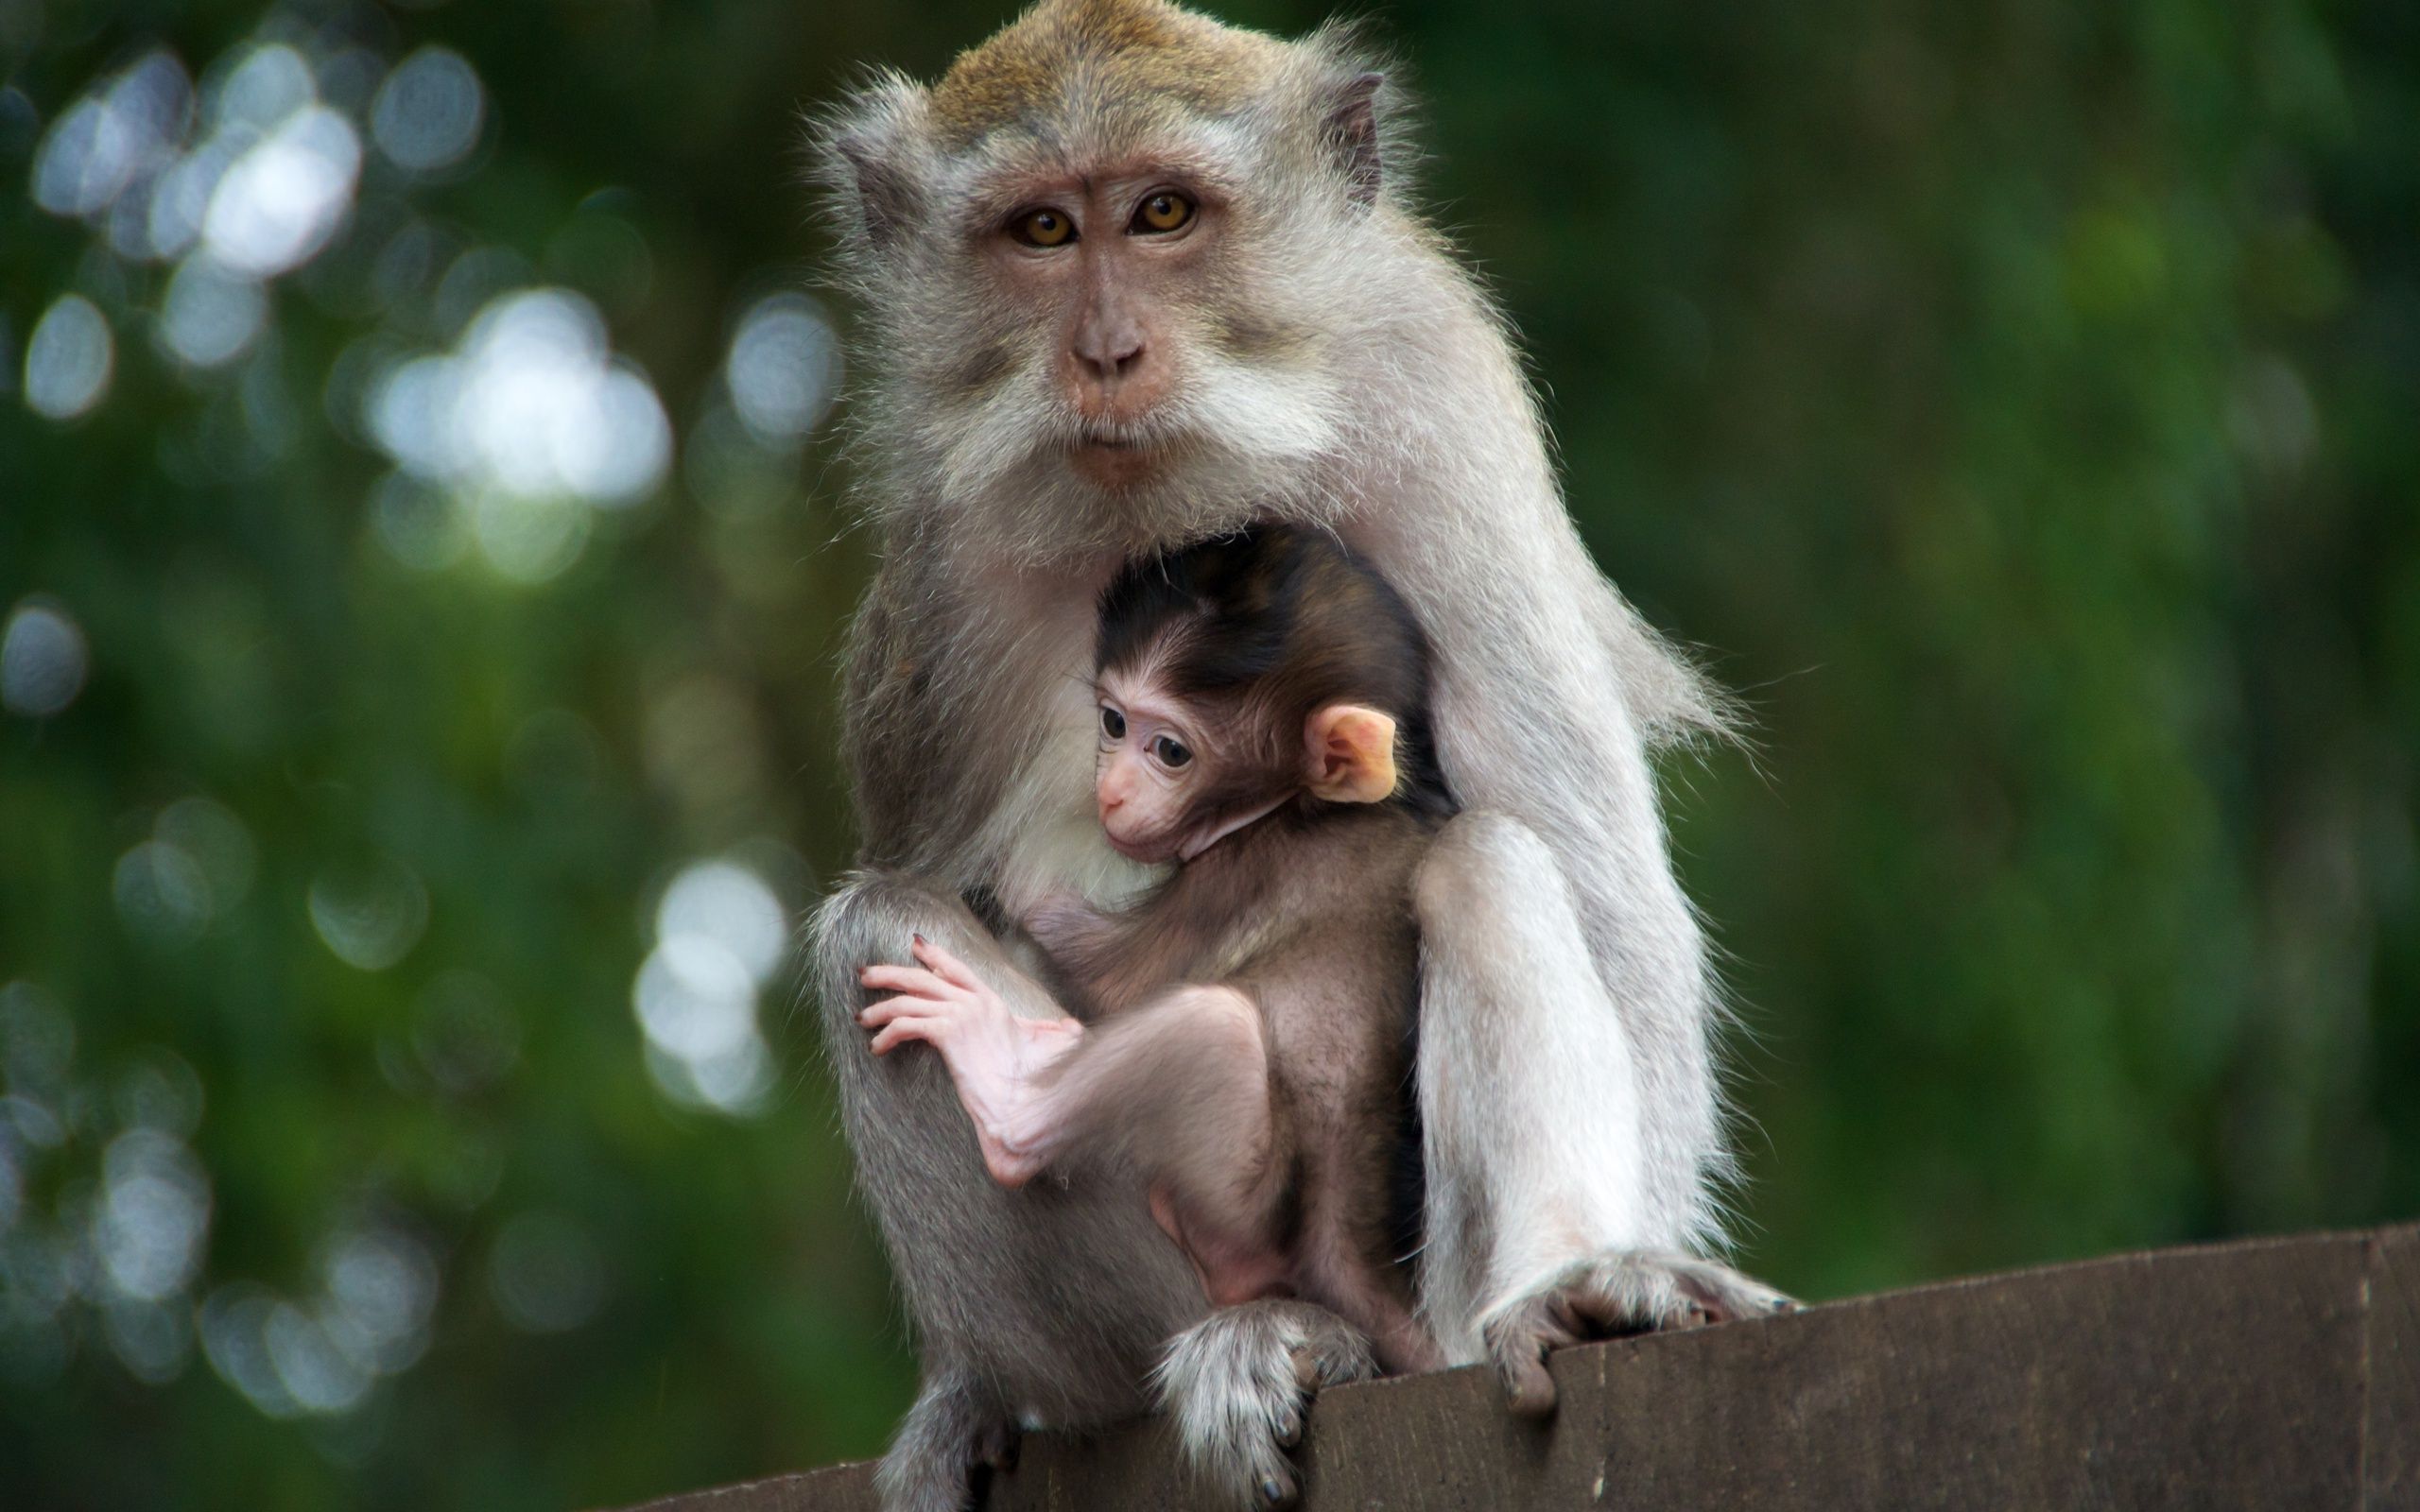 Mama monkey and her baby